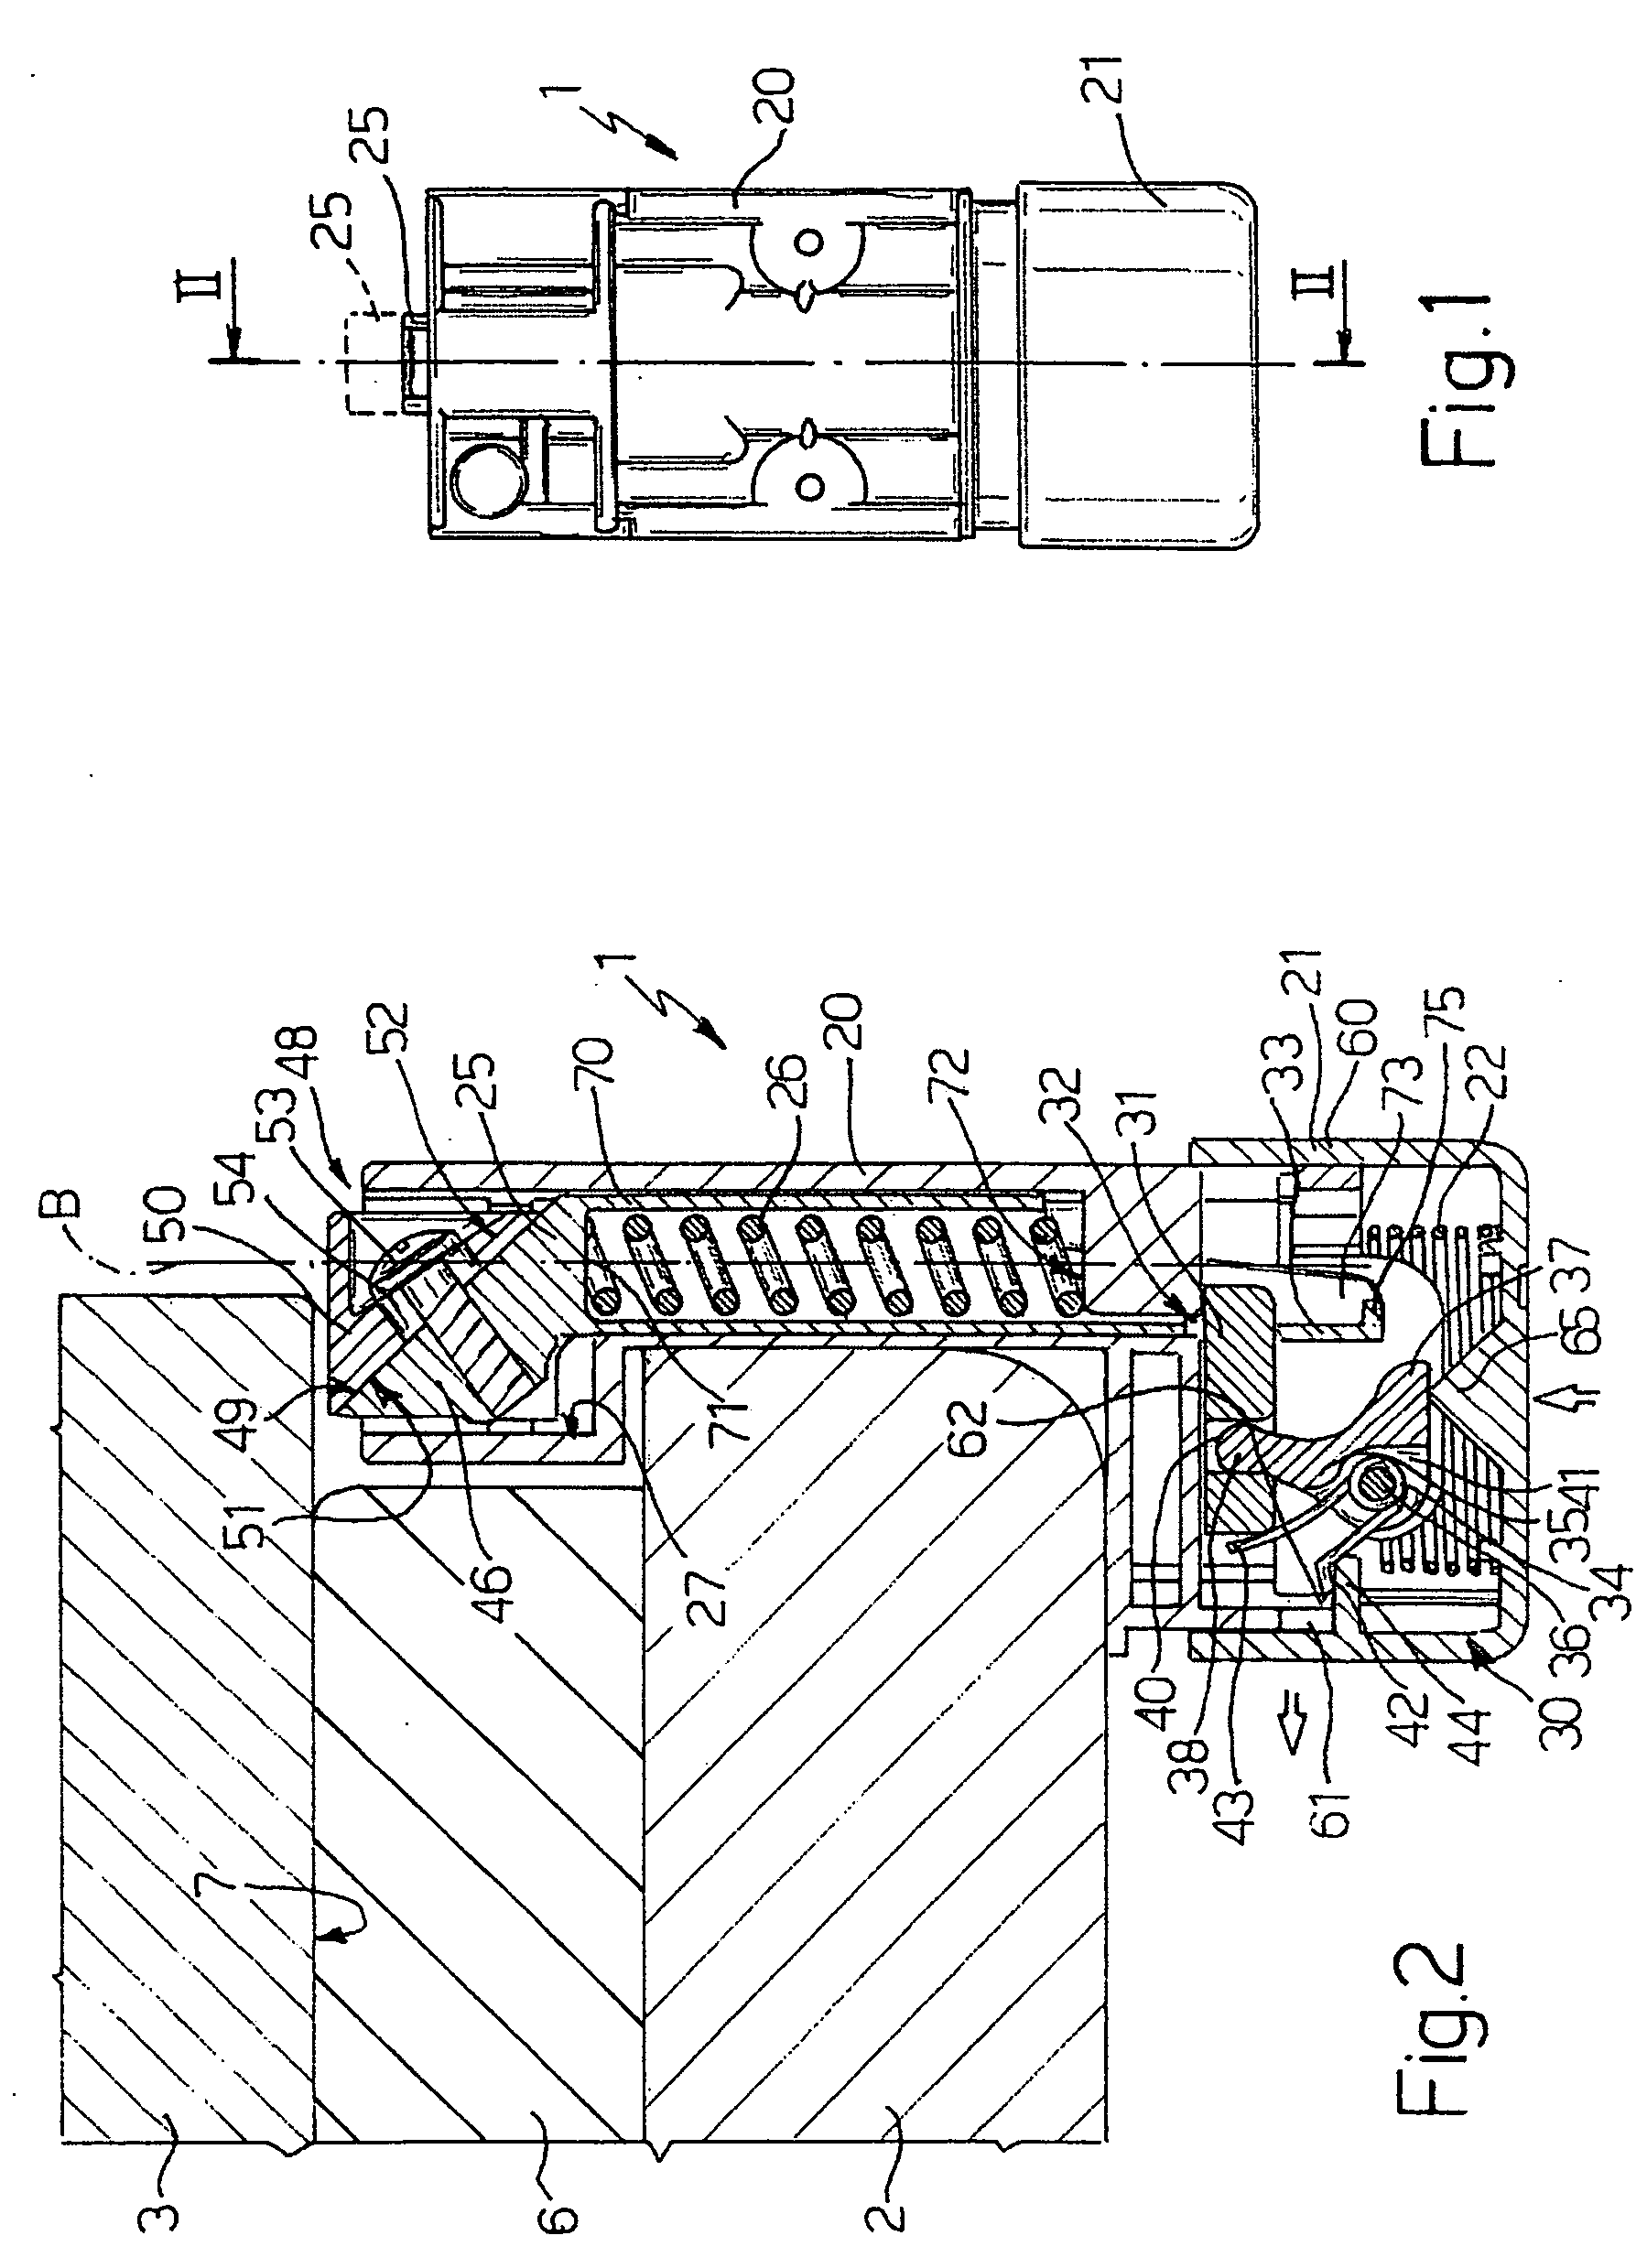 Device for opening a door of an electric household appliance, in particular a refrigerator or freezer